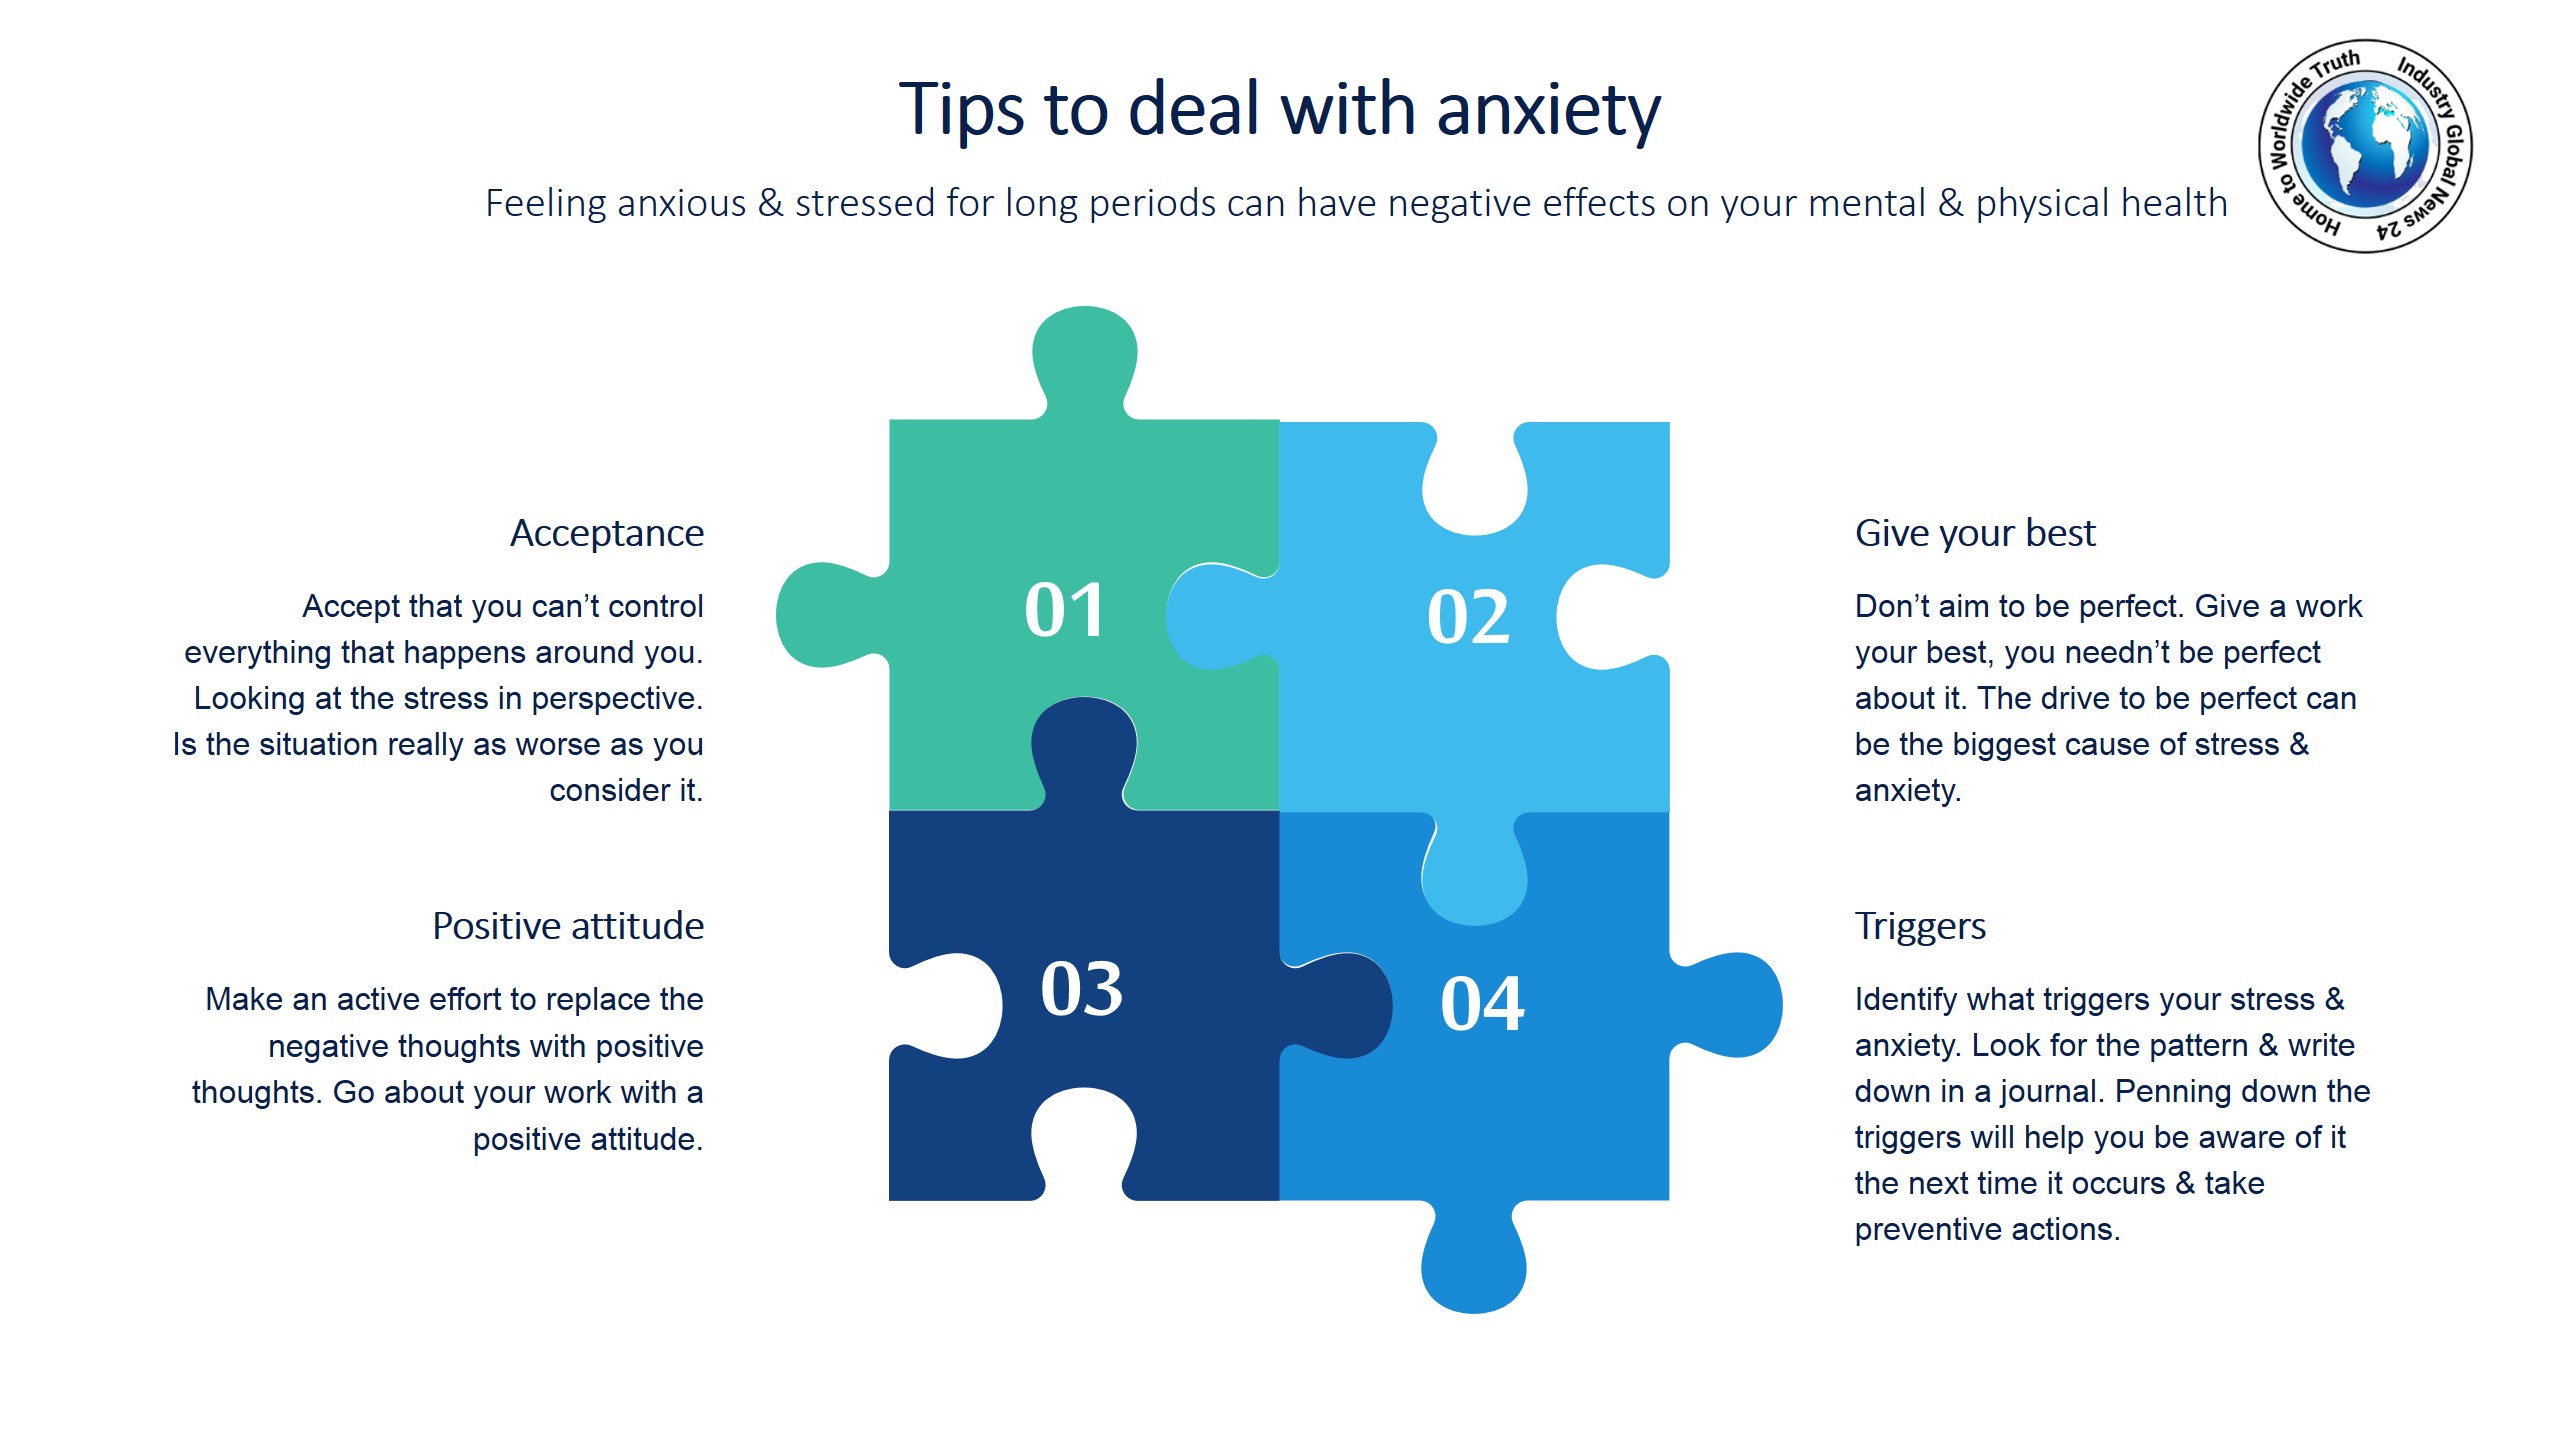 Tips to deal with anxiety